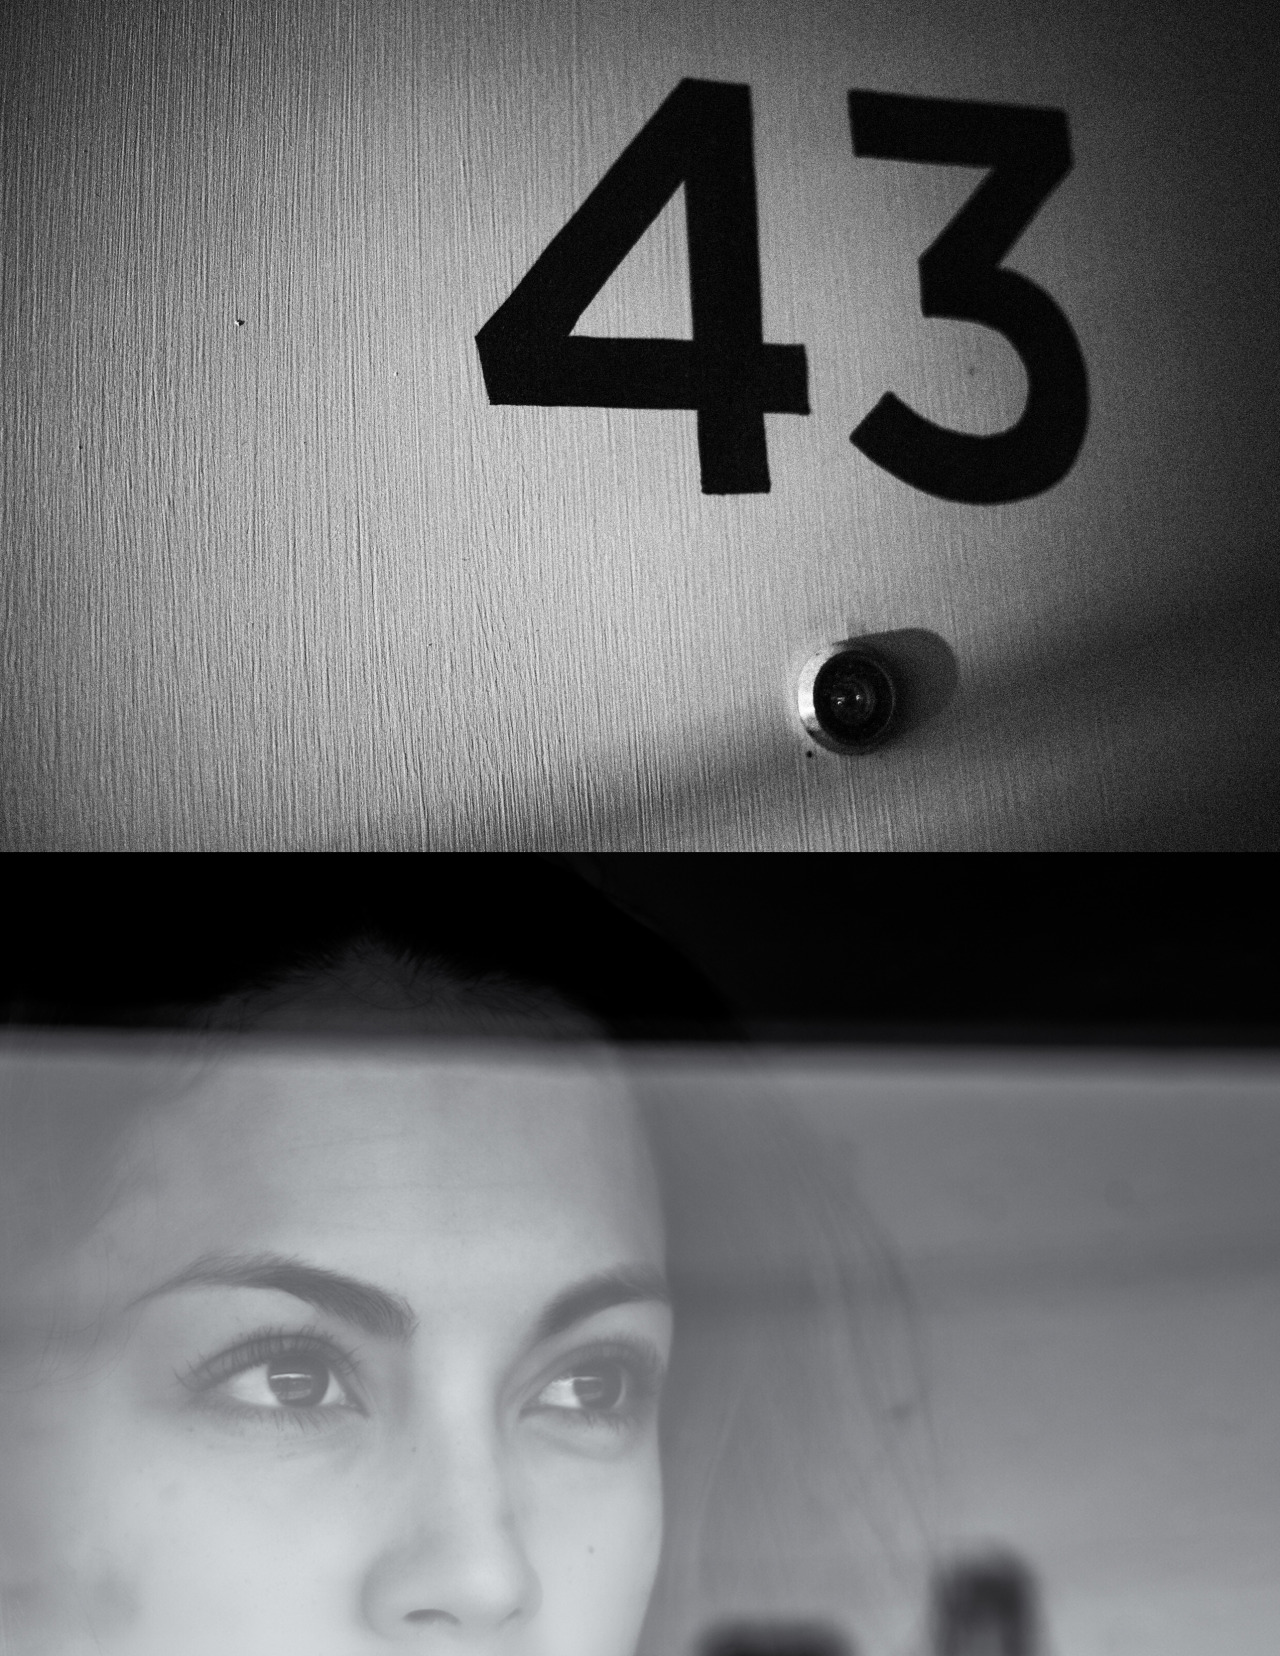 RESERVATIONS : ROCKY 43 a photo series on the last place we can be anonymous. the